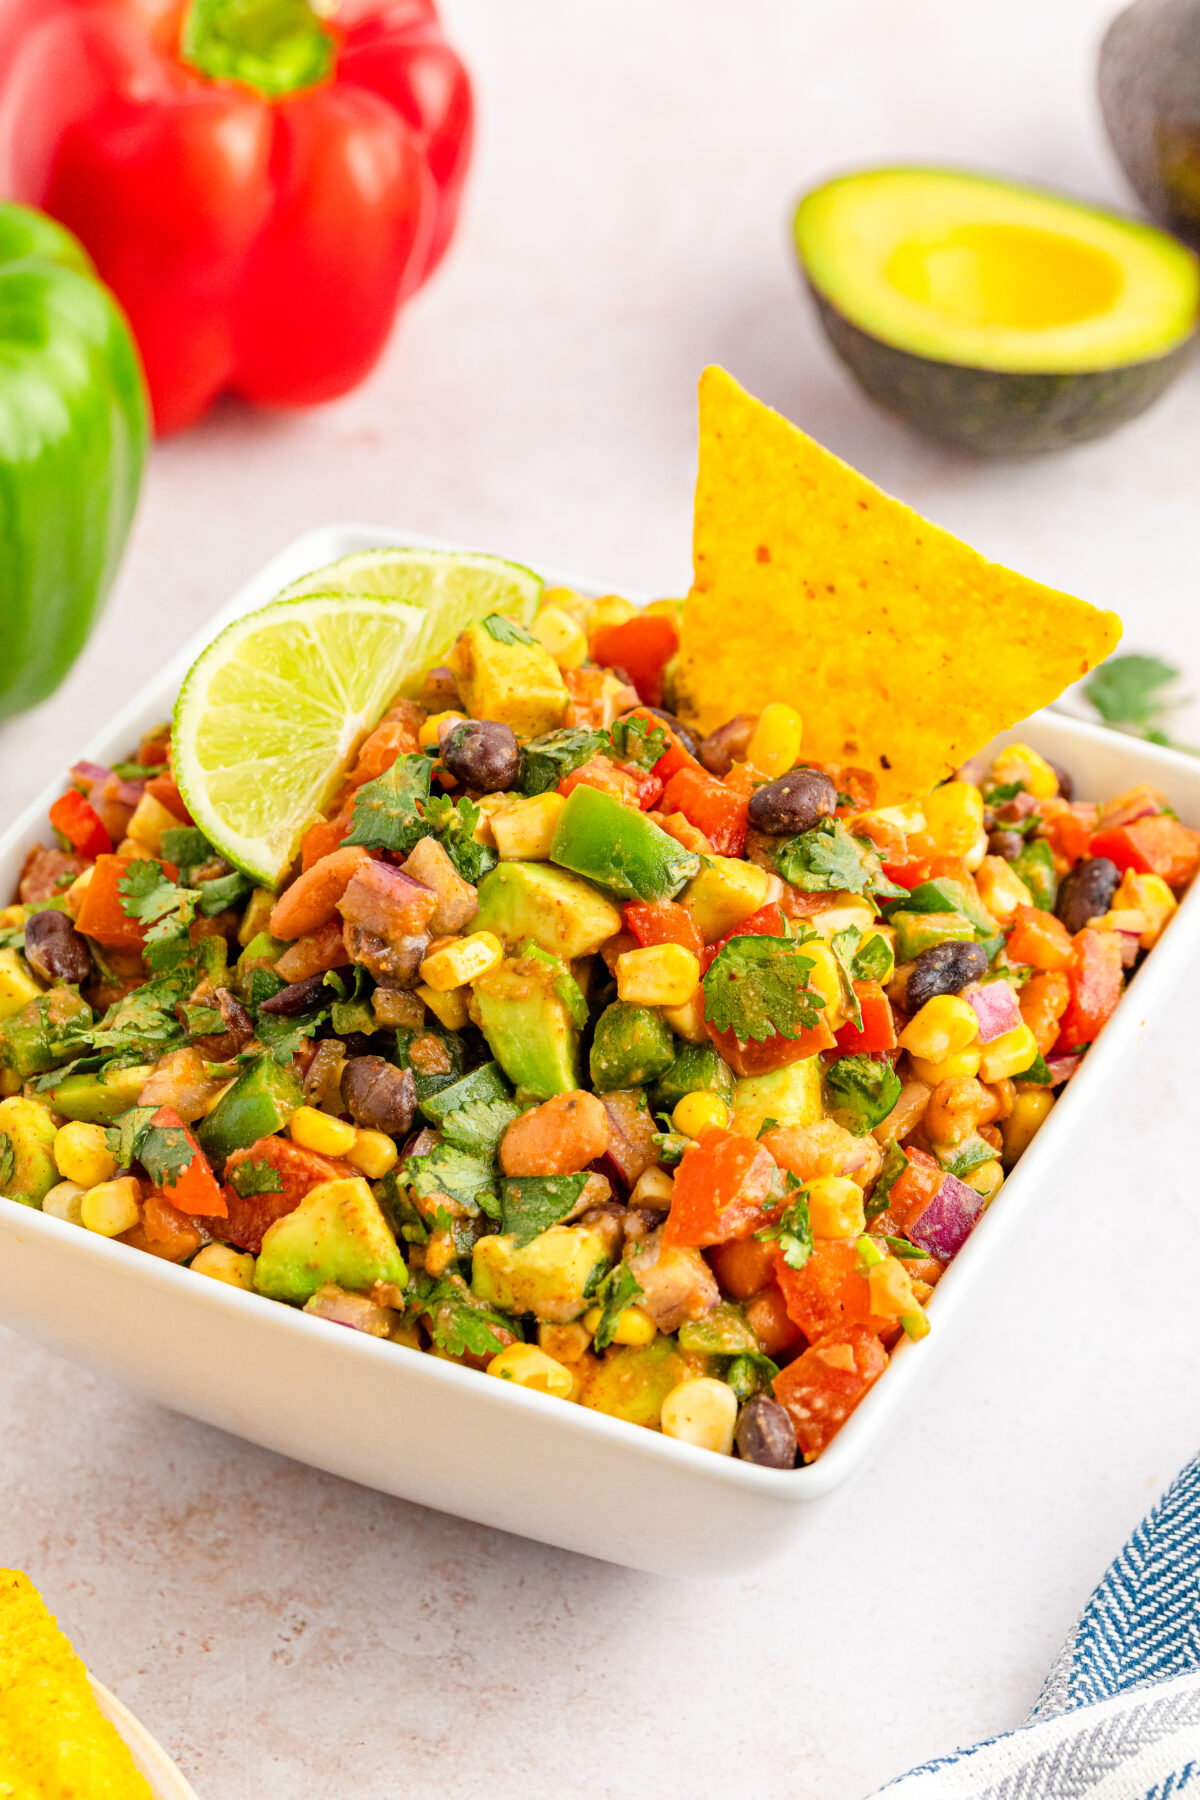 Discover our flavour-packed Cowboy Caviar recipe, a perfect blend of fresh ingredients that's easy to make for picnics, barbecues or potlucks.